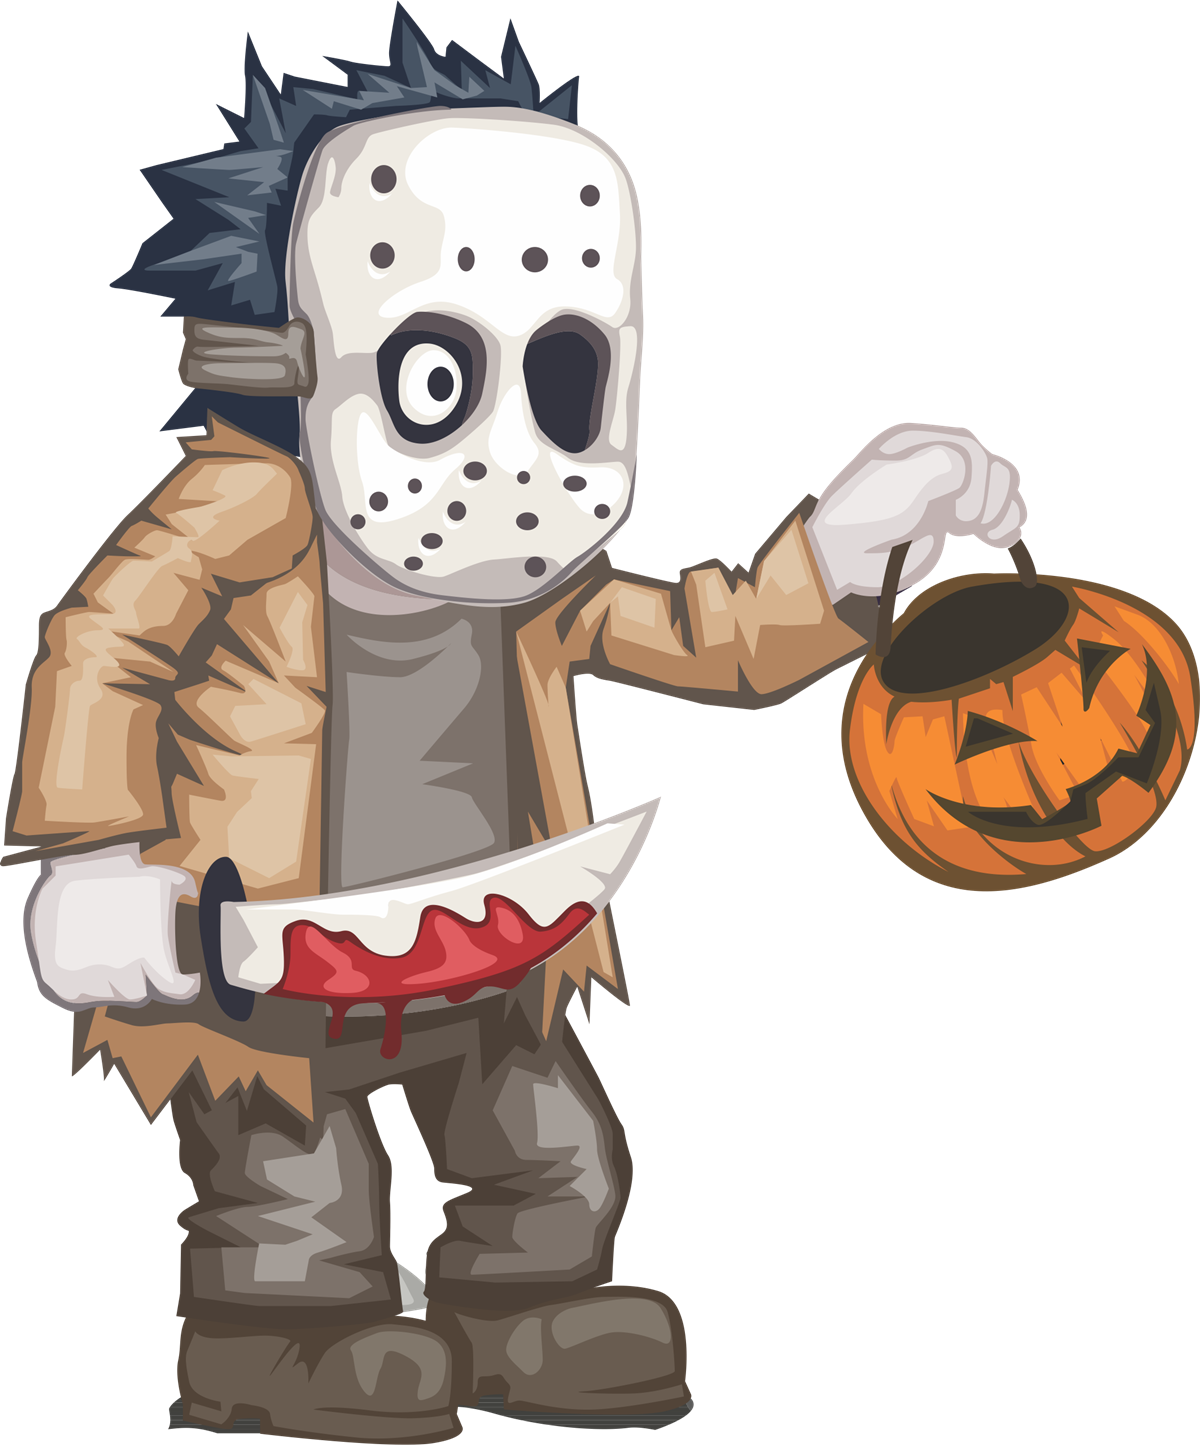 Halloween Horror Characterwith Knifeand Pumpkin PNG